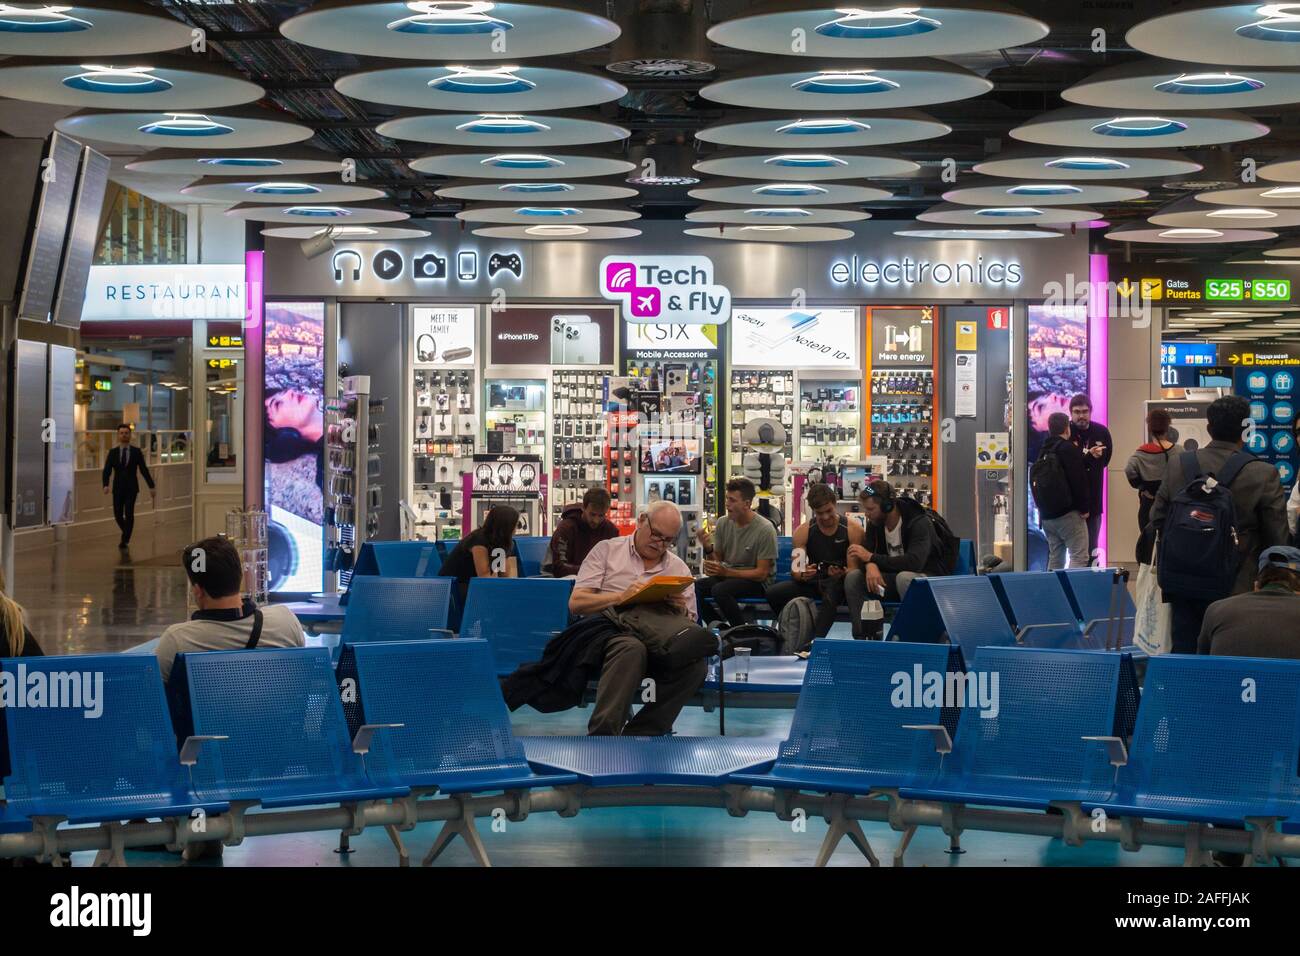 Passengers sit on seats in front of a Tech & Fly technology store in Terminal 4S of Madrid-Barajas Adolfo Suárez Airport, Madrid, Spain Stock Photo